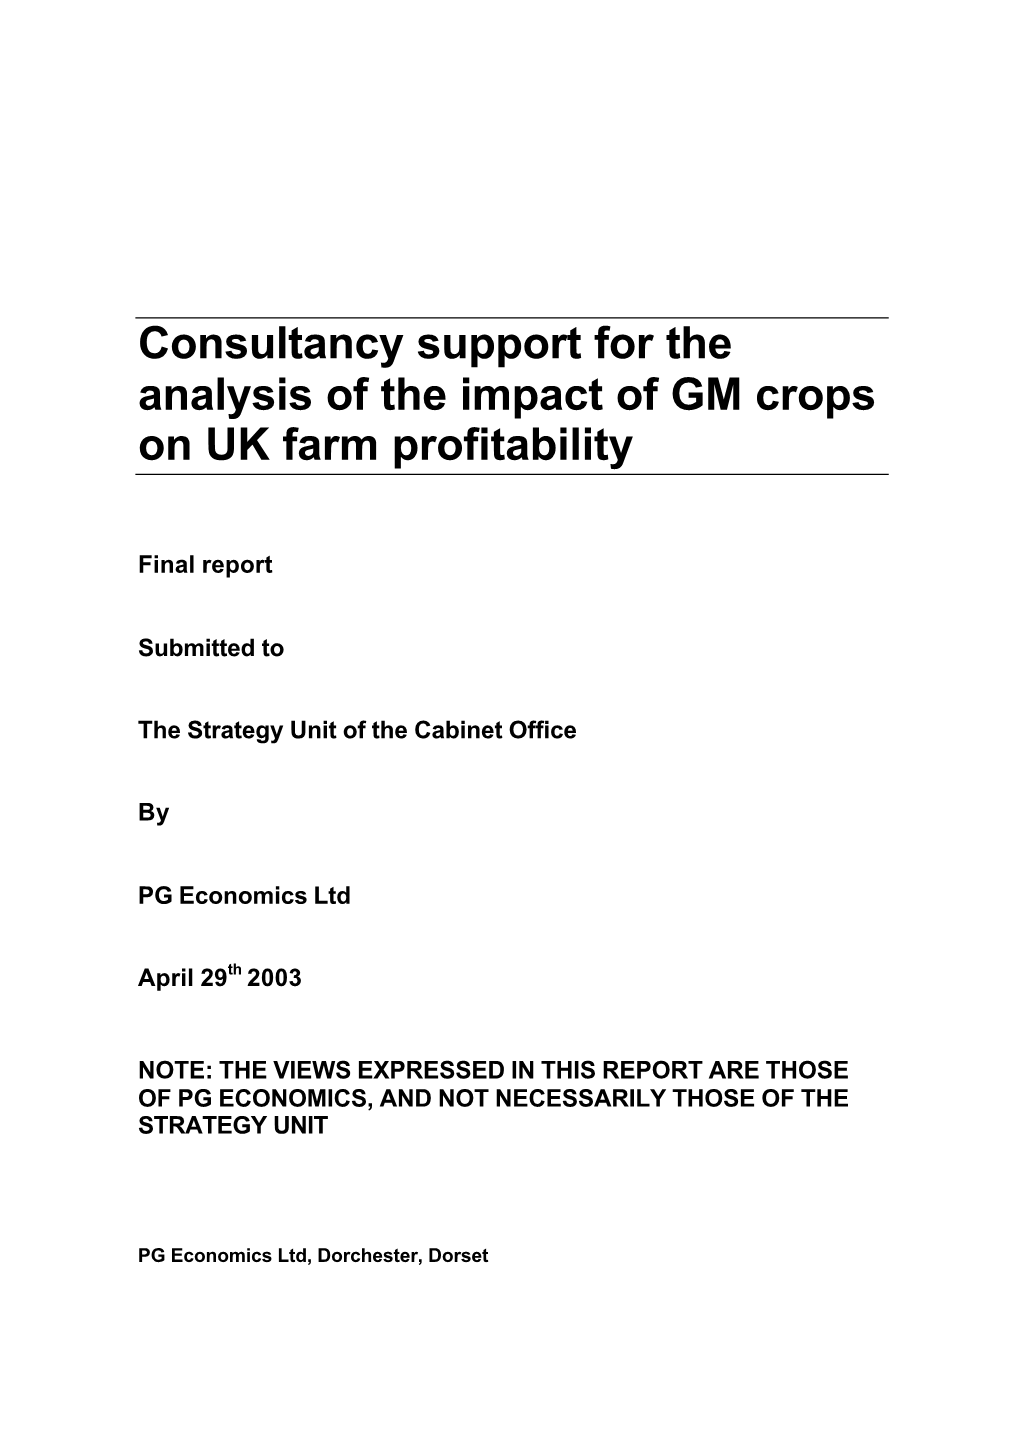 Consultancy Support for the Analysis of the Impact of GM Crops on UK Farm Profitability